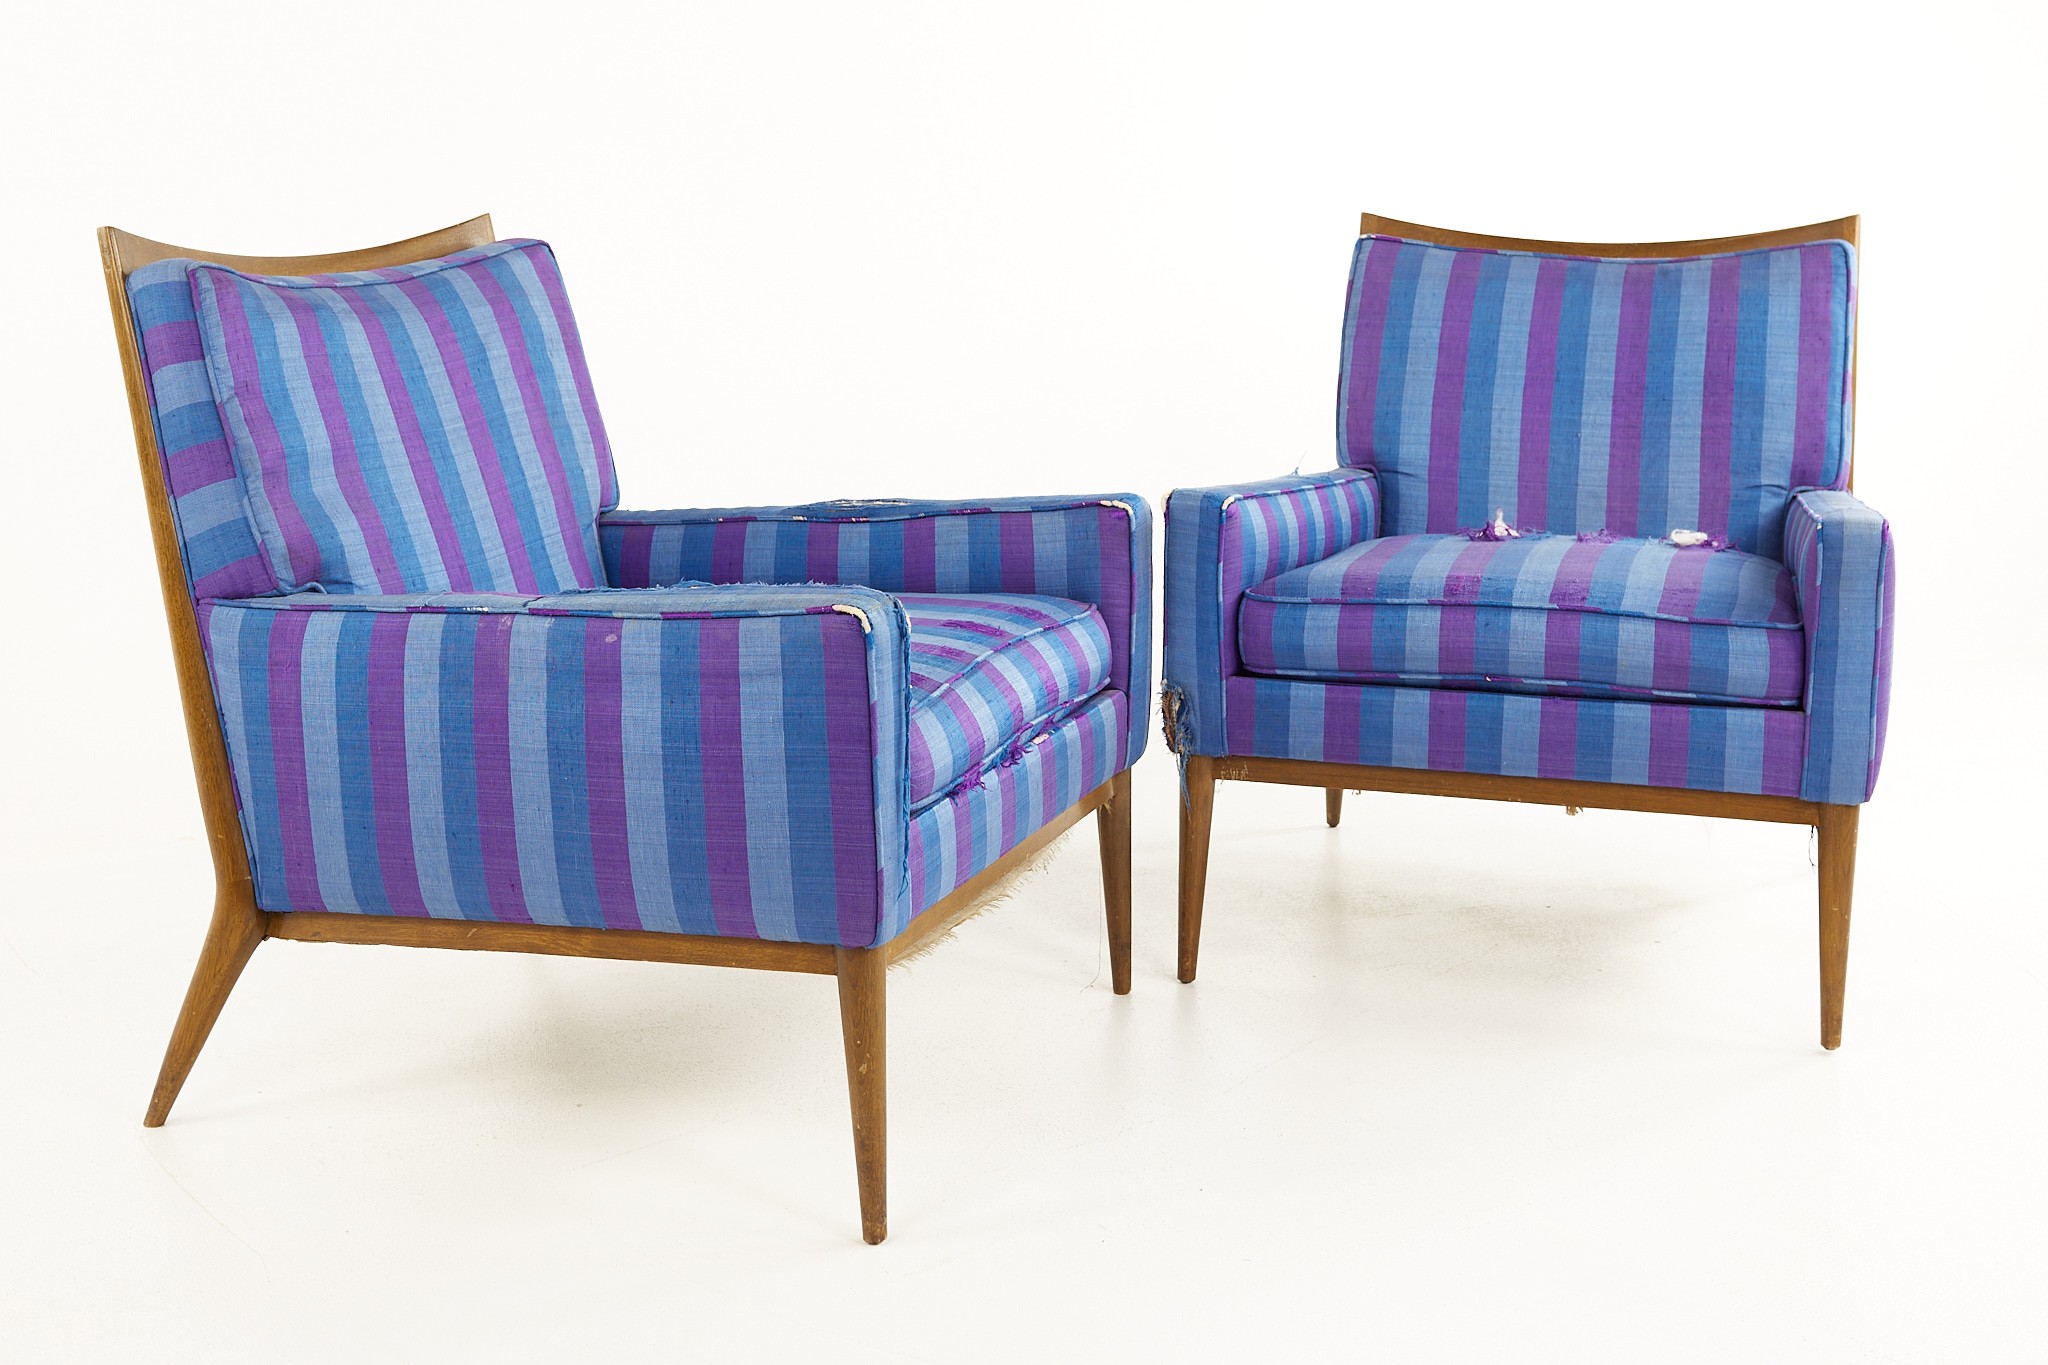 Paul Mccobb Directional Mid Century Lounge Chairs - a Pair